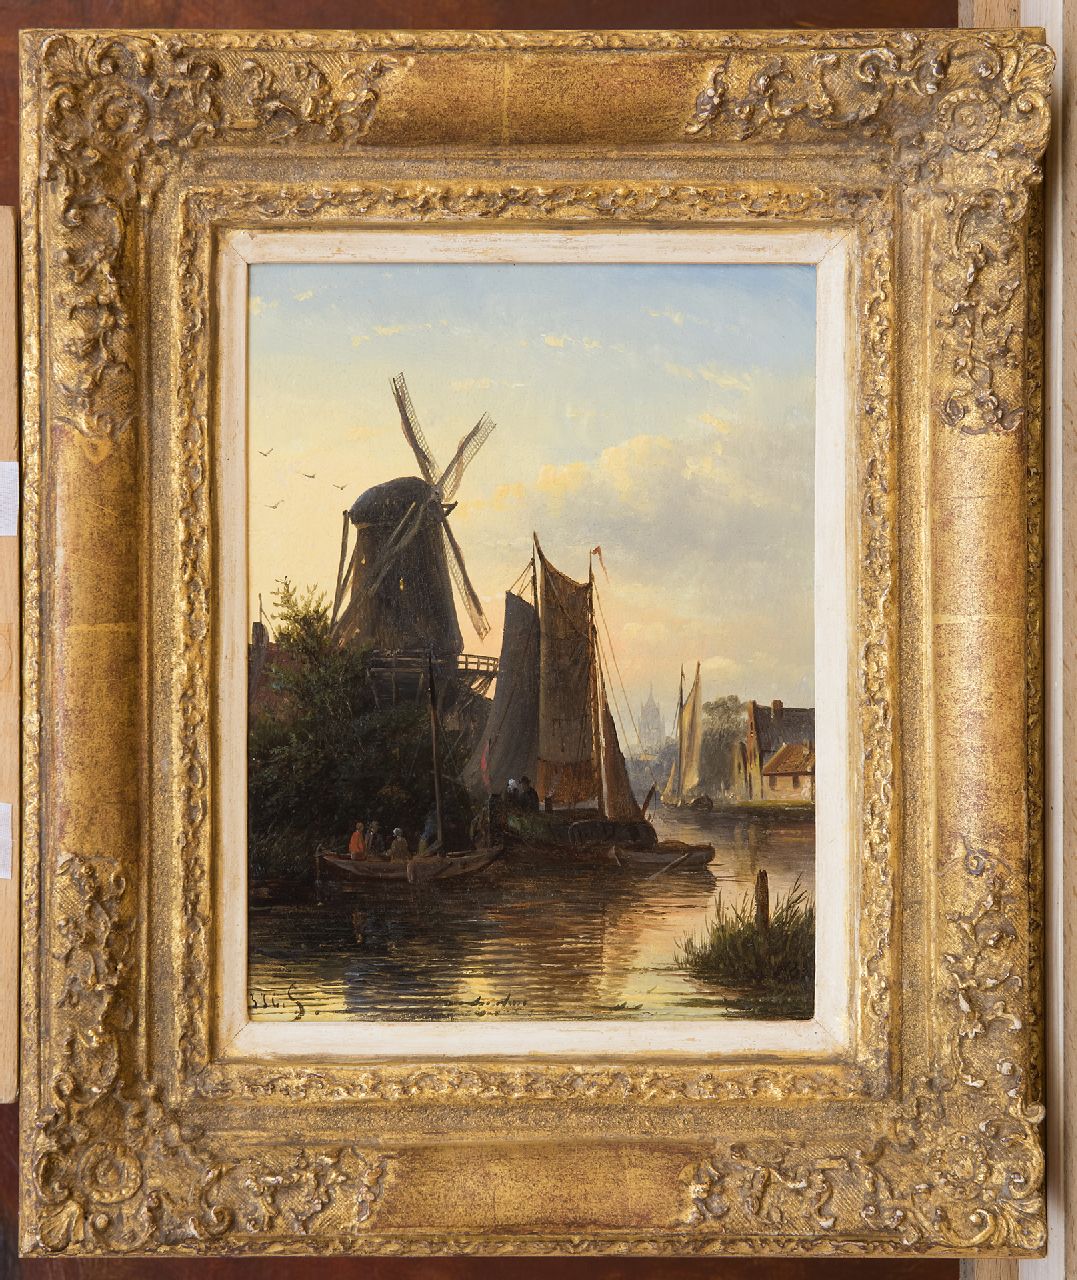 Spohler J.J.C.  | Jacob Jan Coenraad Spohler, Moored sailing boats near a mill, oil on panel 22.0 x 17.0 cm, signed l.l. with initials